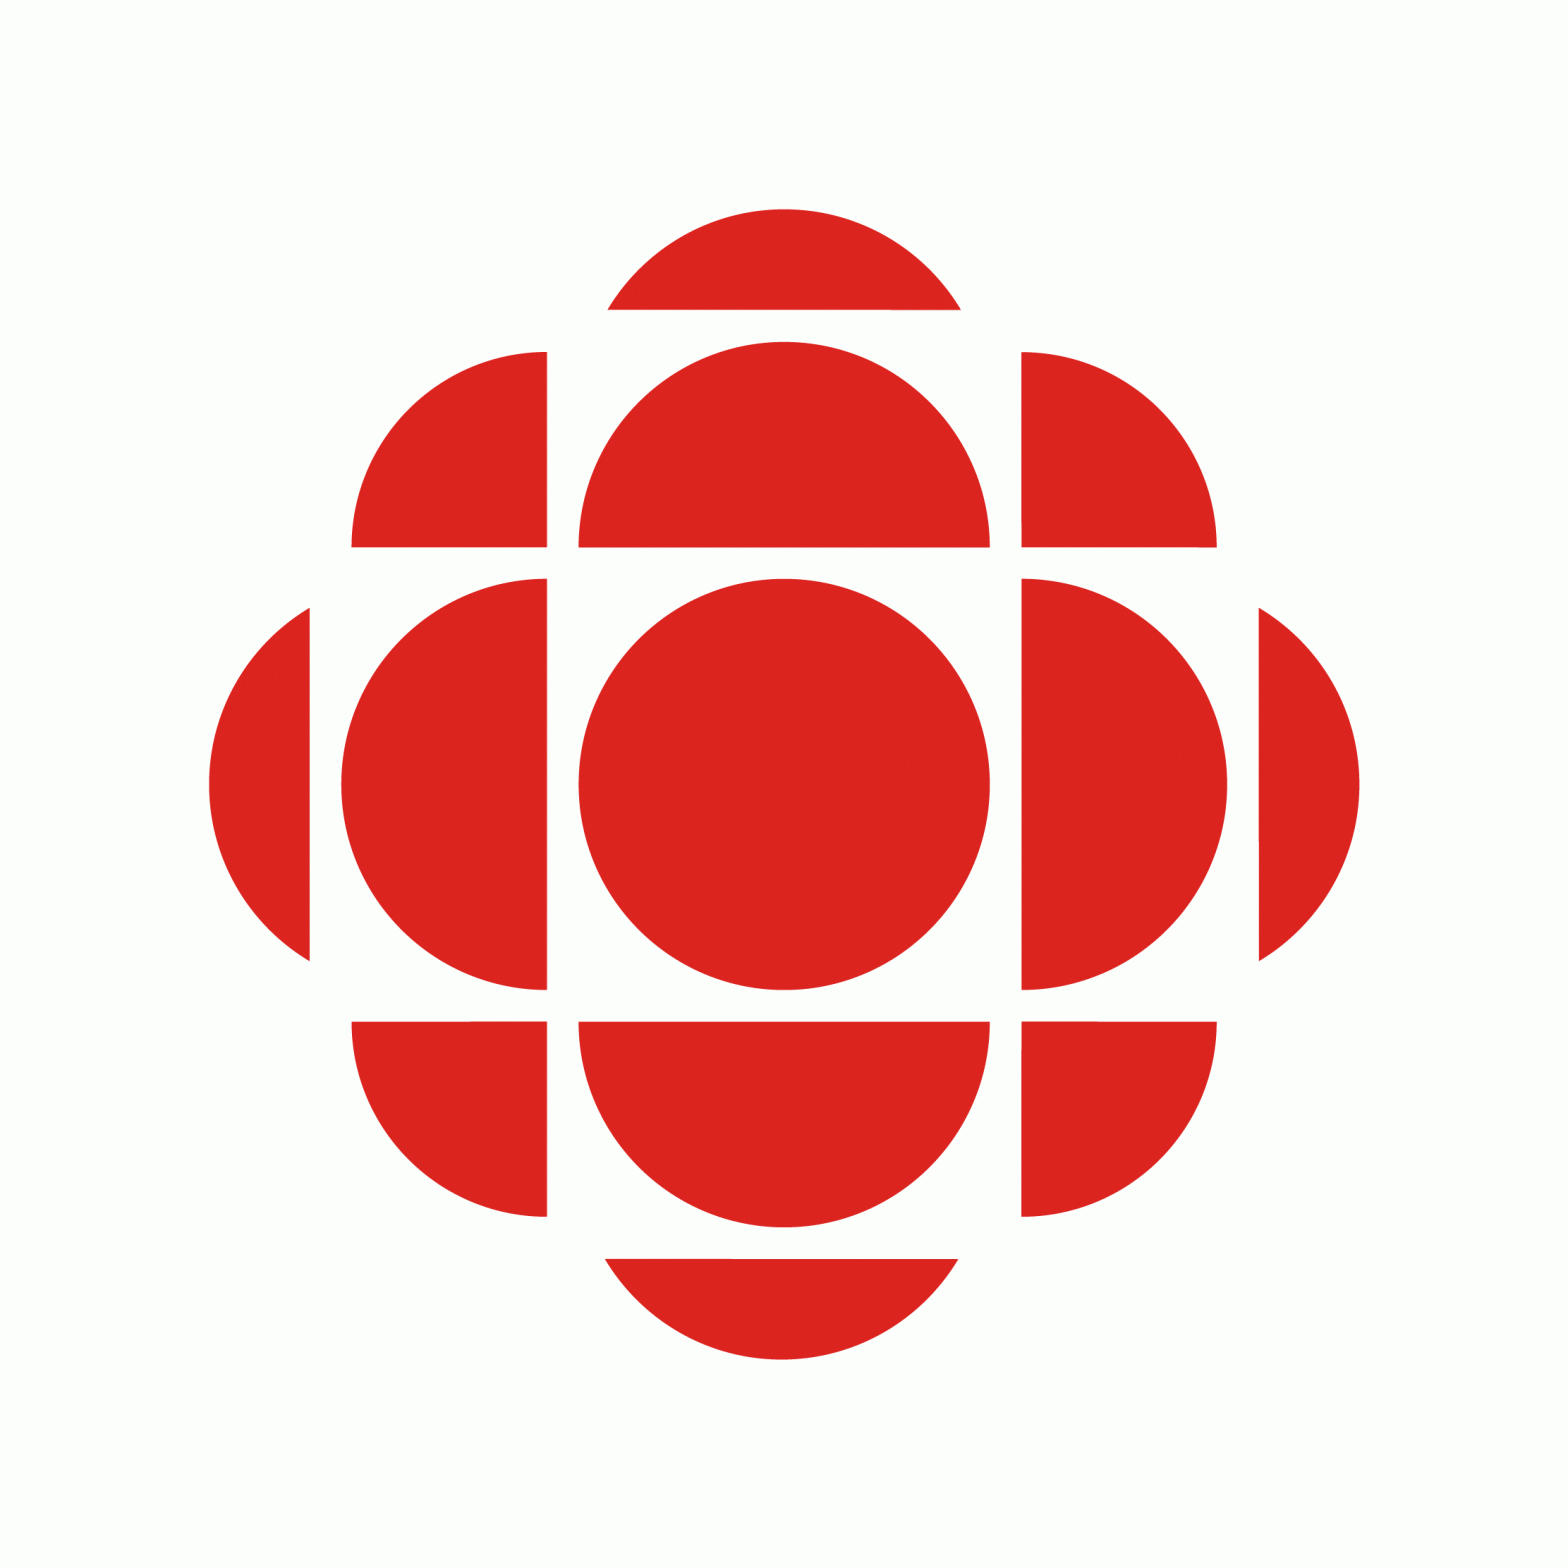 CBC fights the culture war